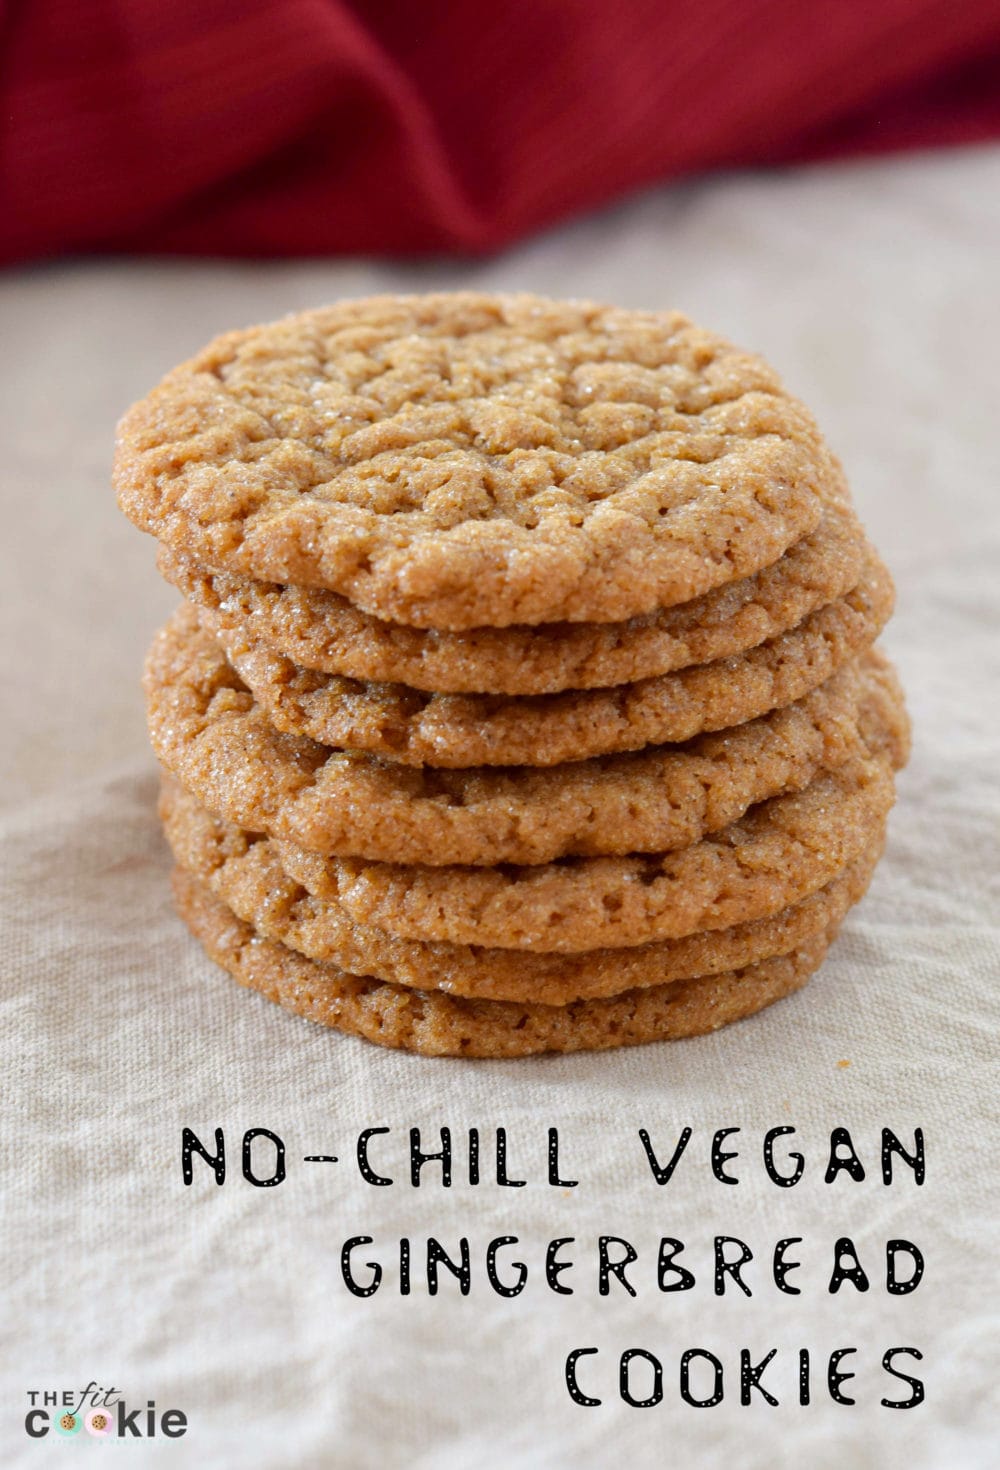 Want to make some gingerbread cookies quickly without chilling the dough and rolling it out? Make these easy No-Chill Vegan Gingerbread Cookies! - @TheFitCookie #cookies #vegan #recipe